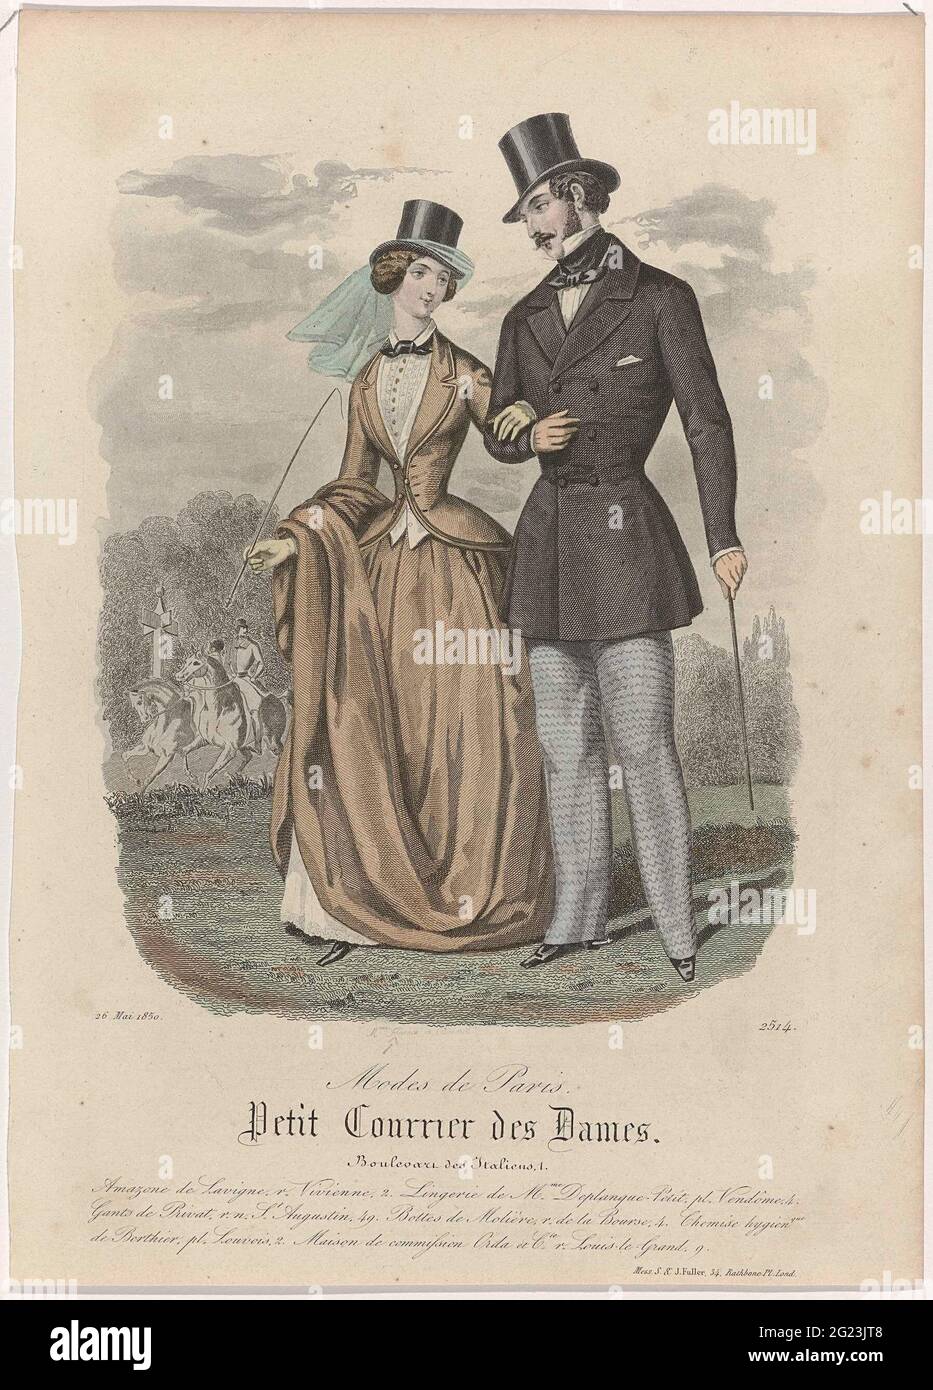 Petit Courrier des Ladies, 26 Mai 1850, no. 2514: Amazon de Lavign (...). A  Heard Couple. The woman is wearing a rich costume. With the right hand she  holds her skirt, so